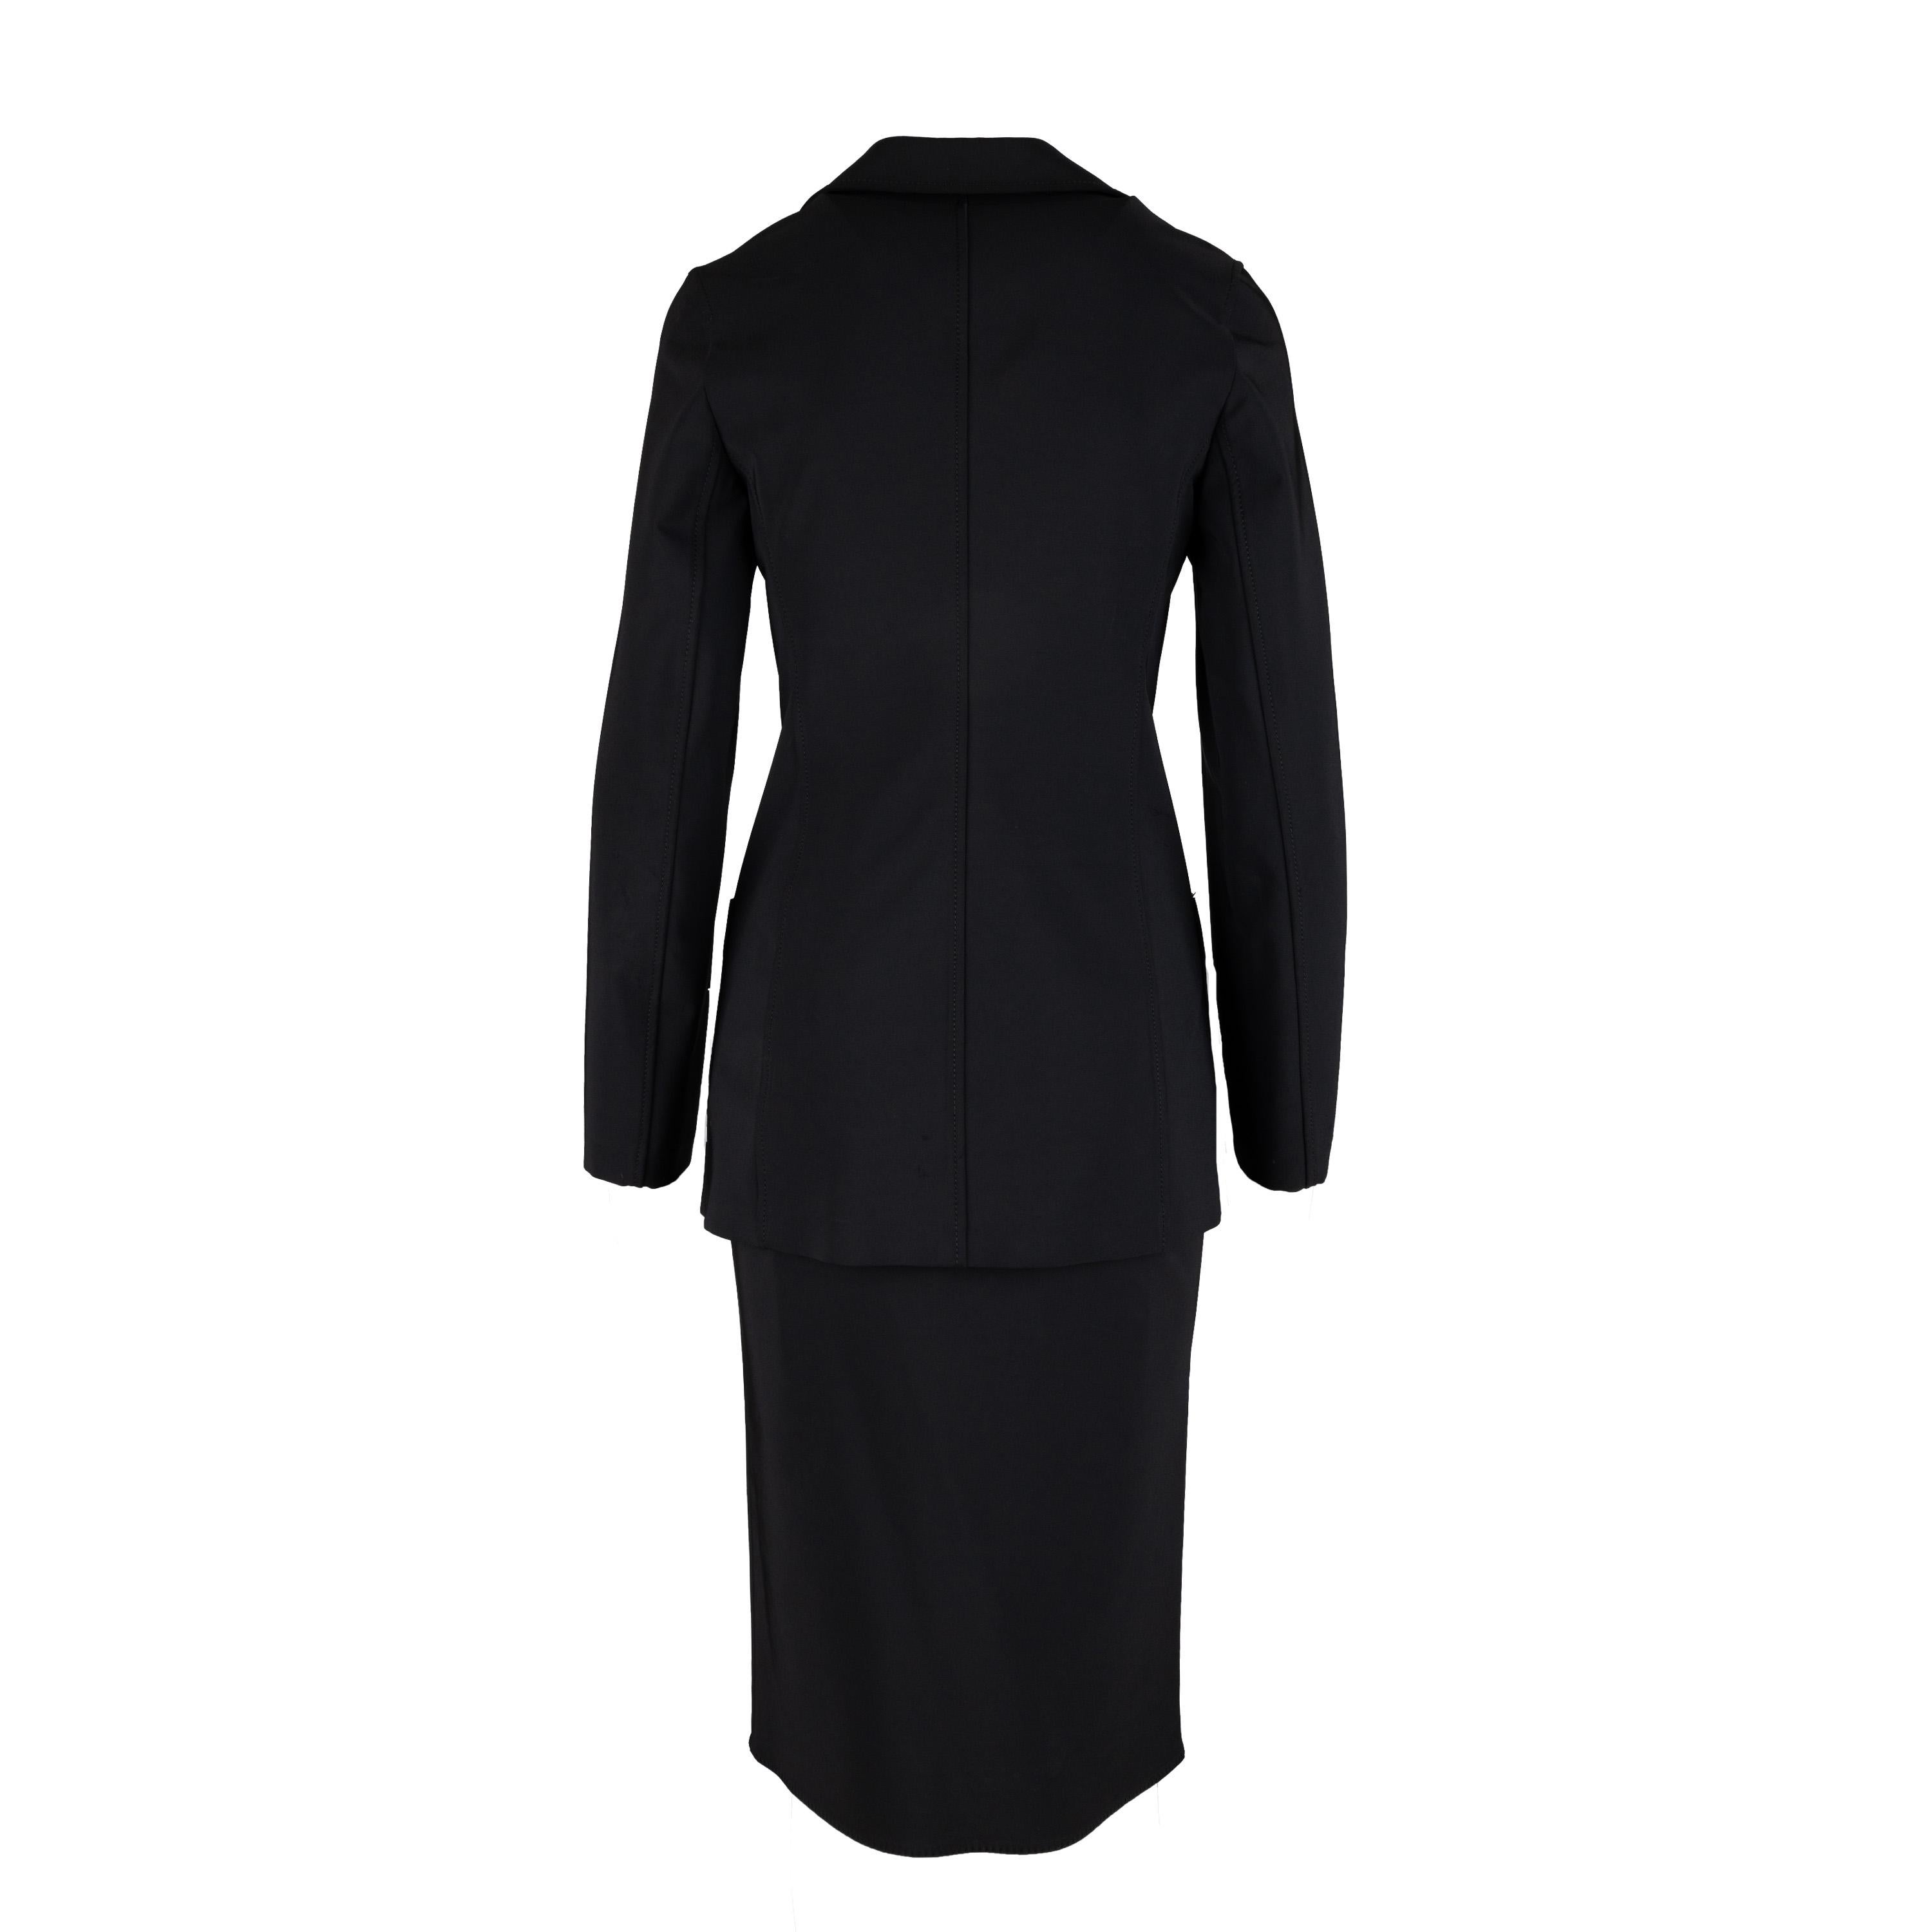 This Prada Long Jacket and Skirt Set is tailored to perfection with a structured fit. The long suit jacket has a collar and three front buttons, with two front pockets, while the skirt has a side zipper closure. Crafted from a stretchy fabric for